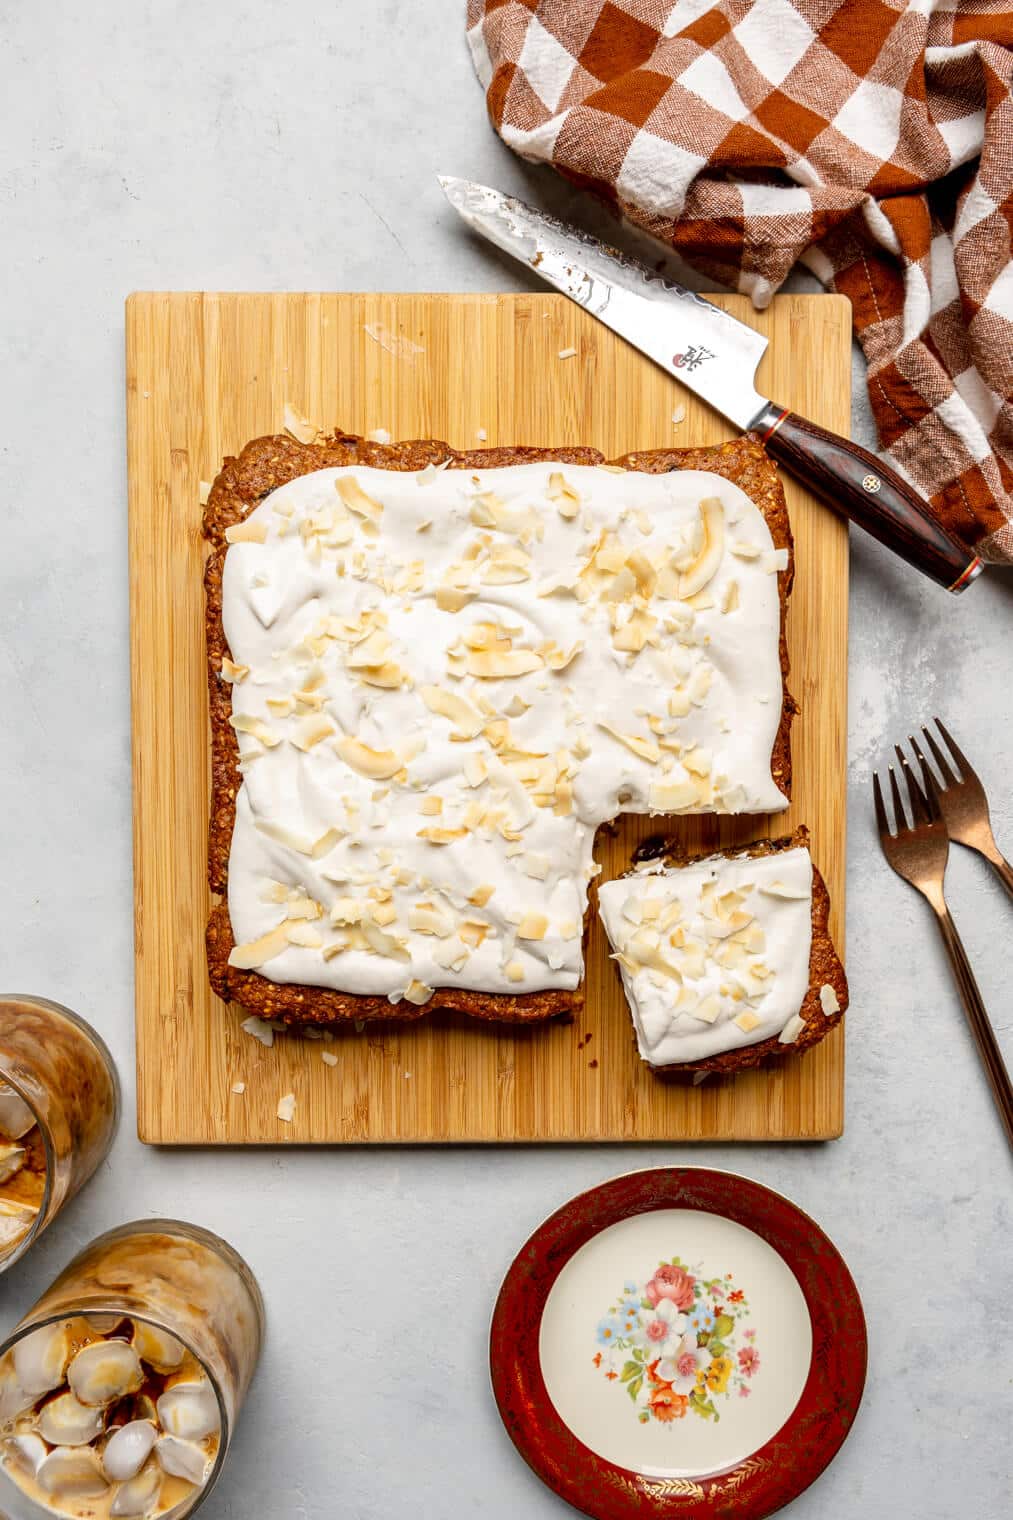 Oatmeal breakfast cake with a corner cut out, topped with coconut whipped cream and coconut flakes on a wooden cutting board.